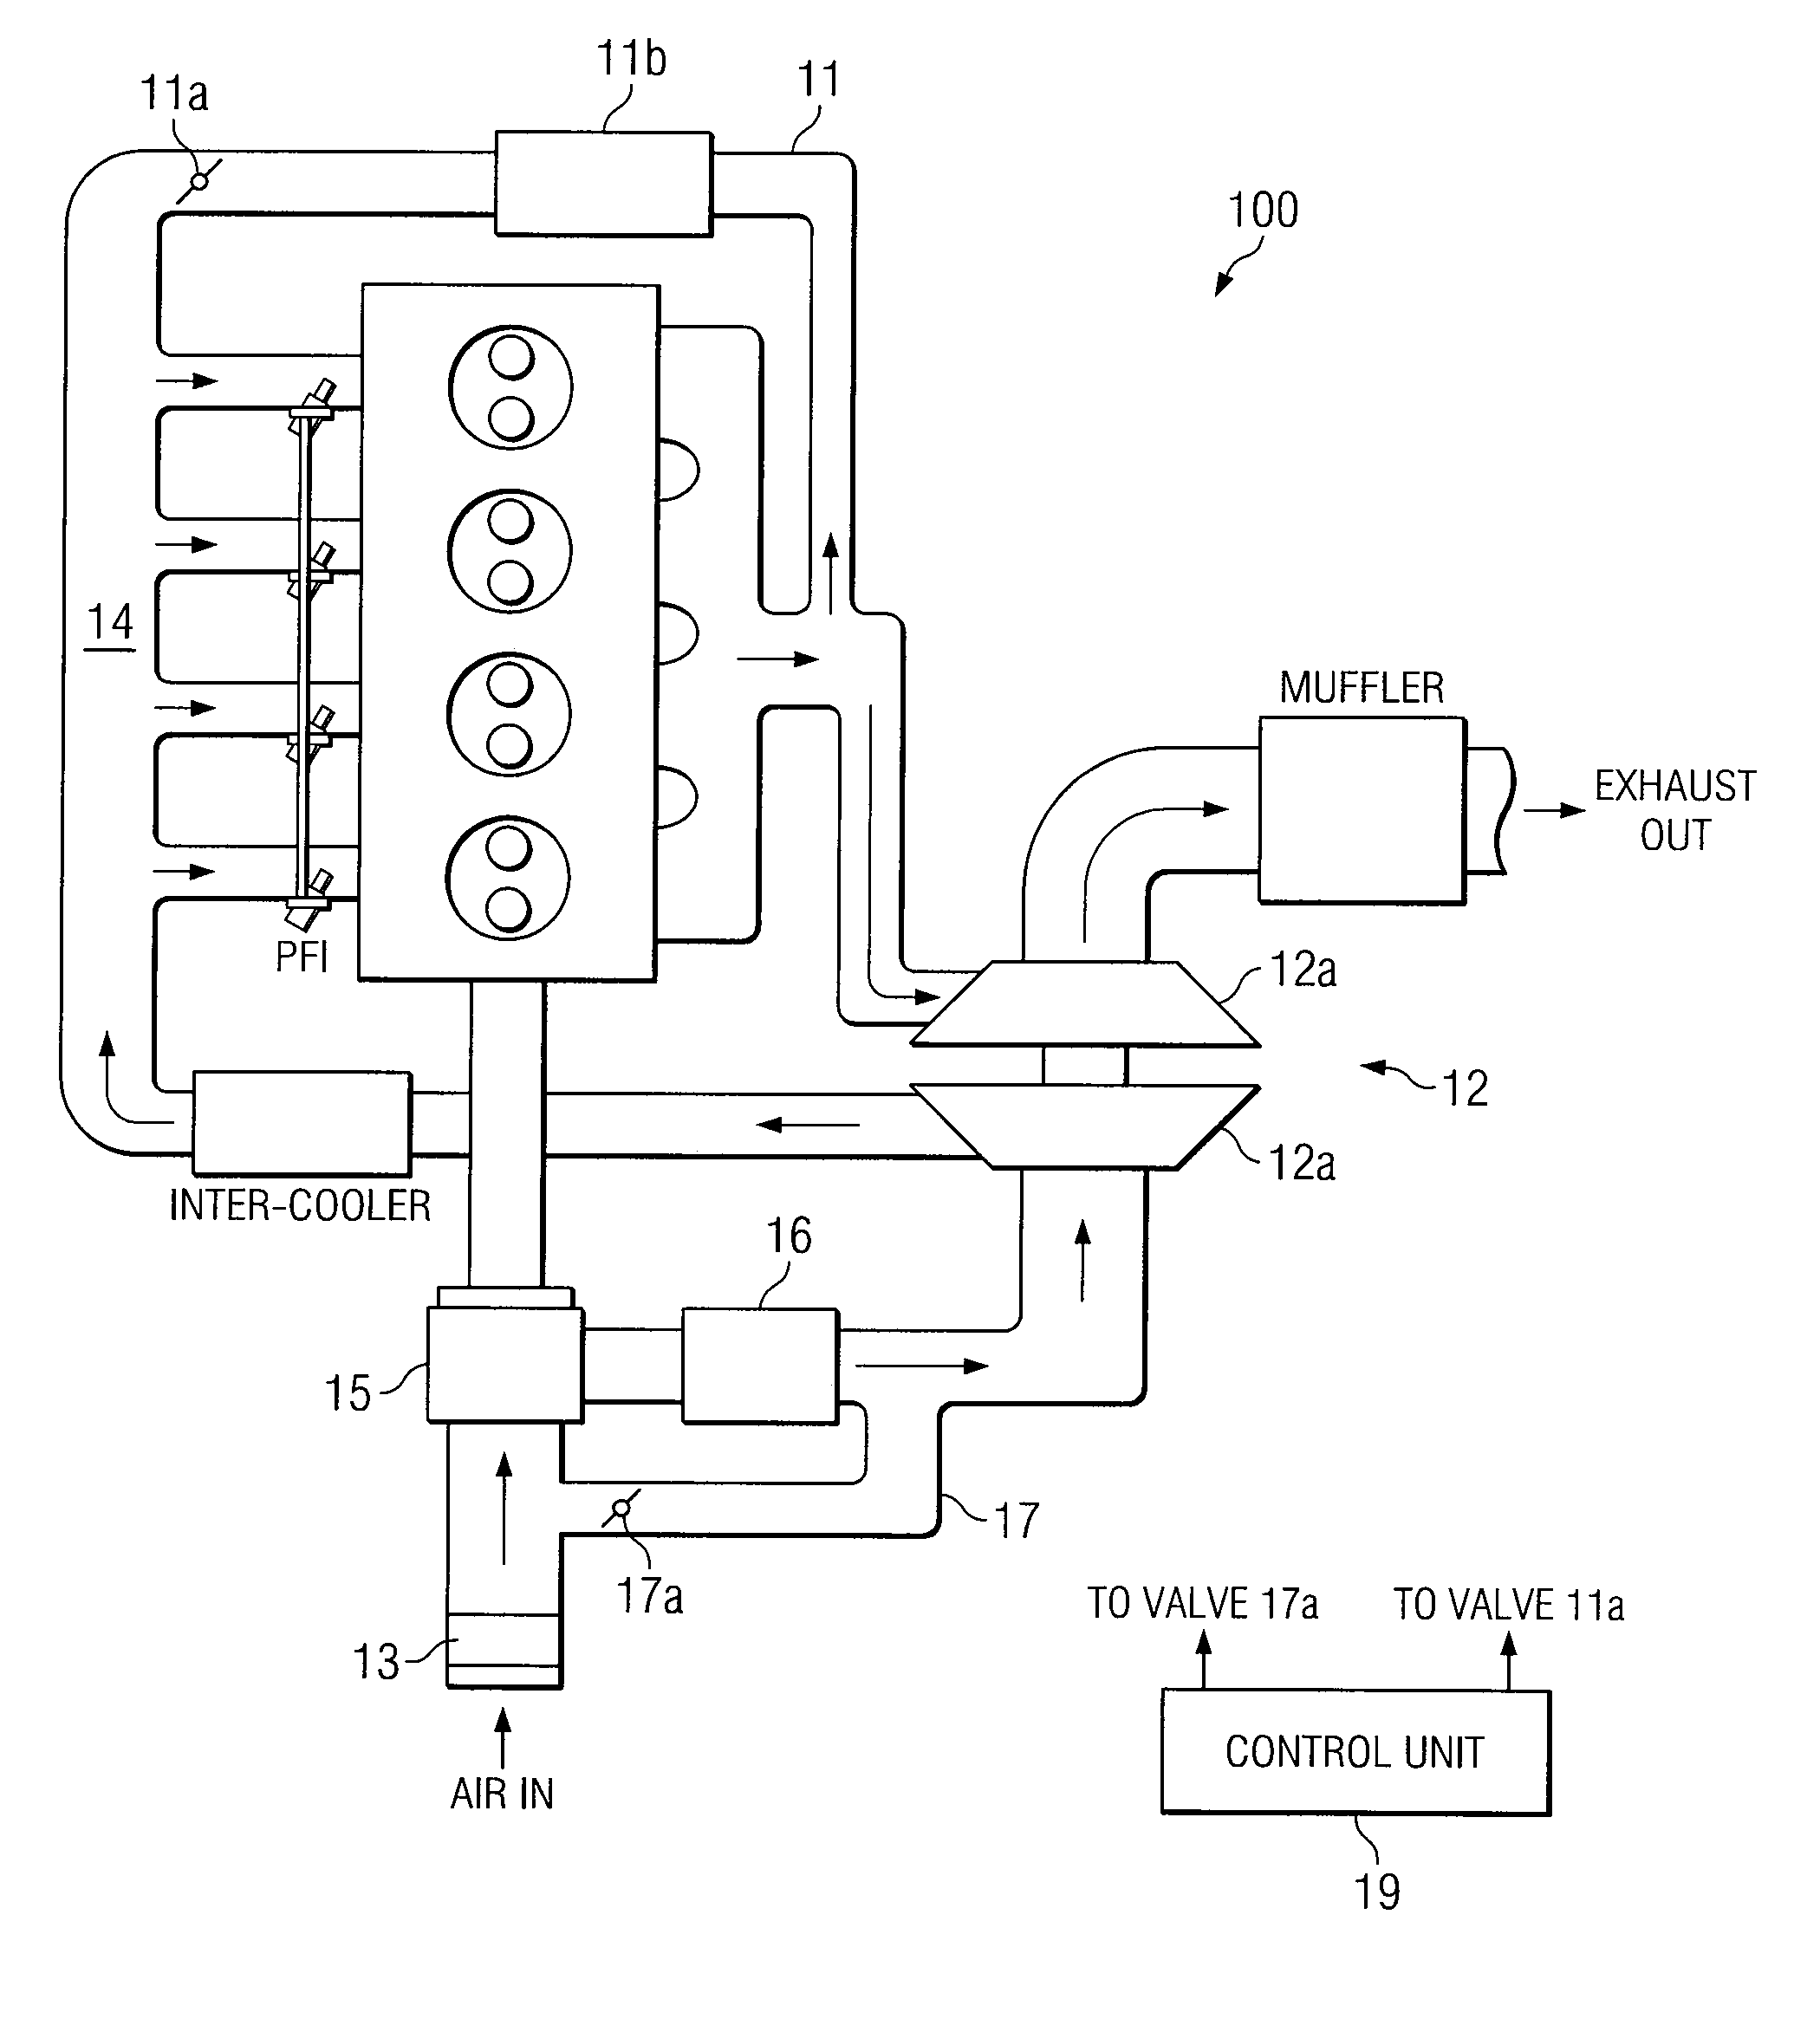 Hcci combustion timing control with decoupled control of in-cylinder air/egr mass and oxygen concentration